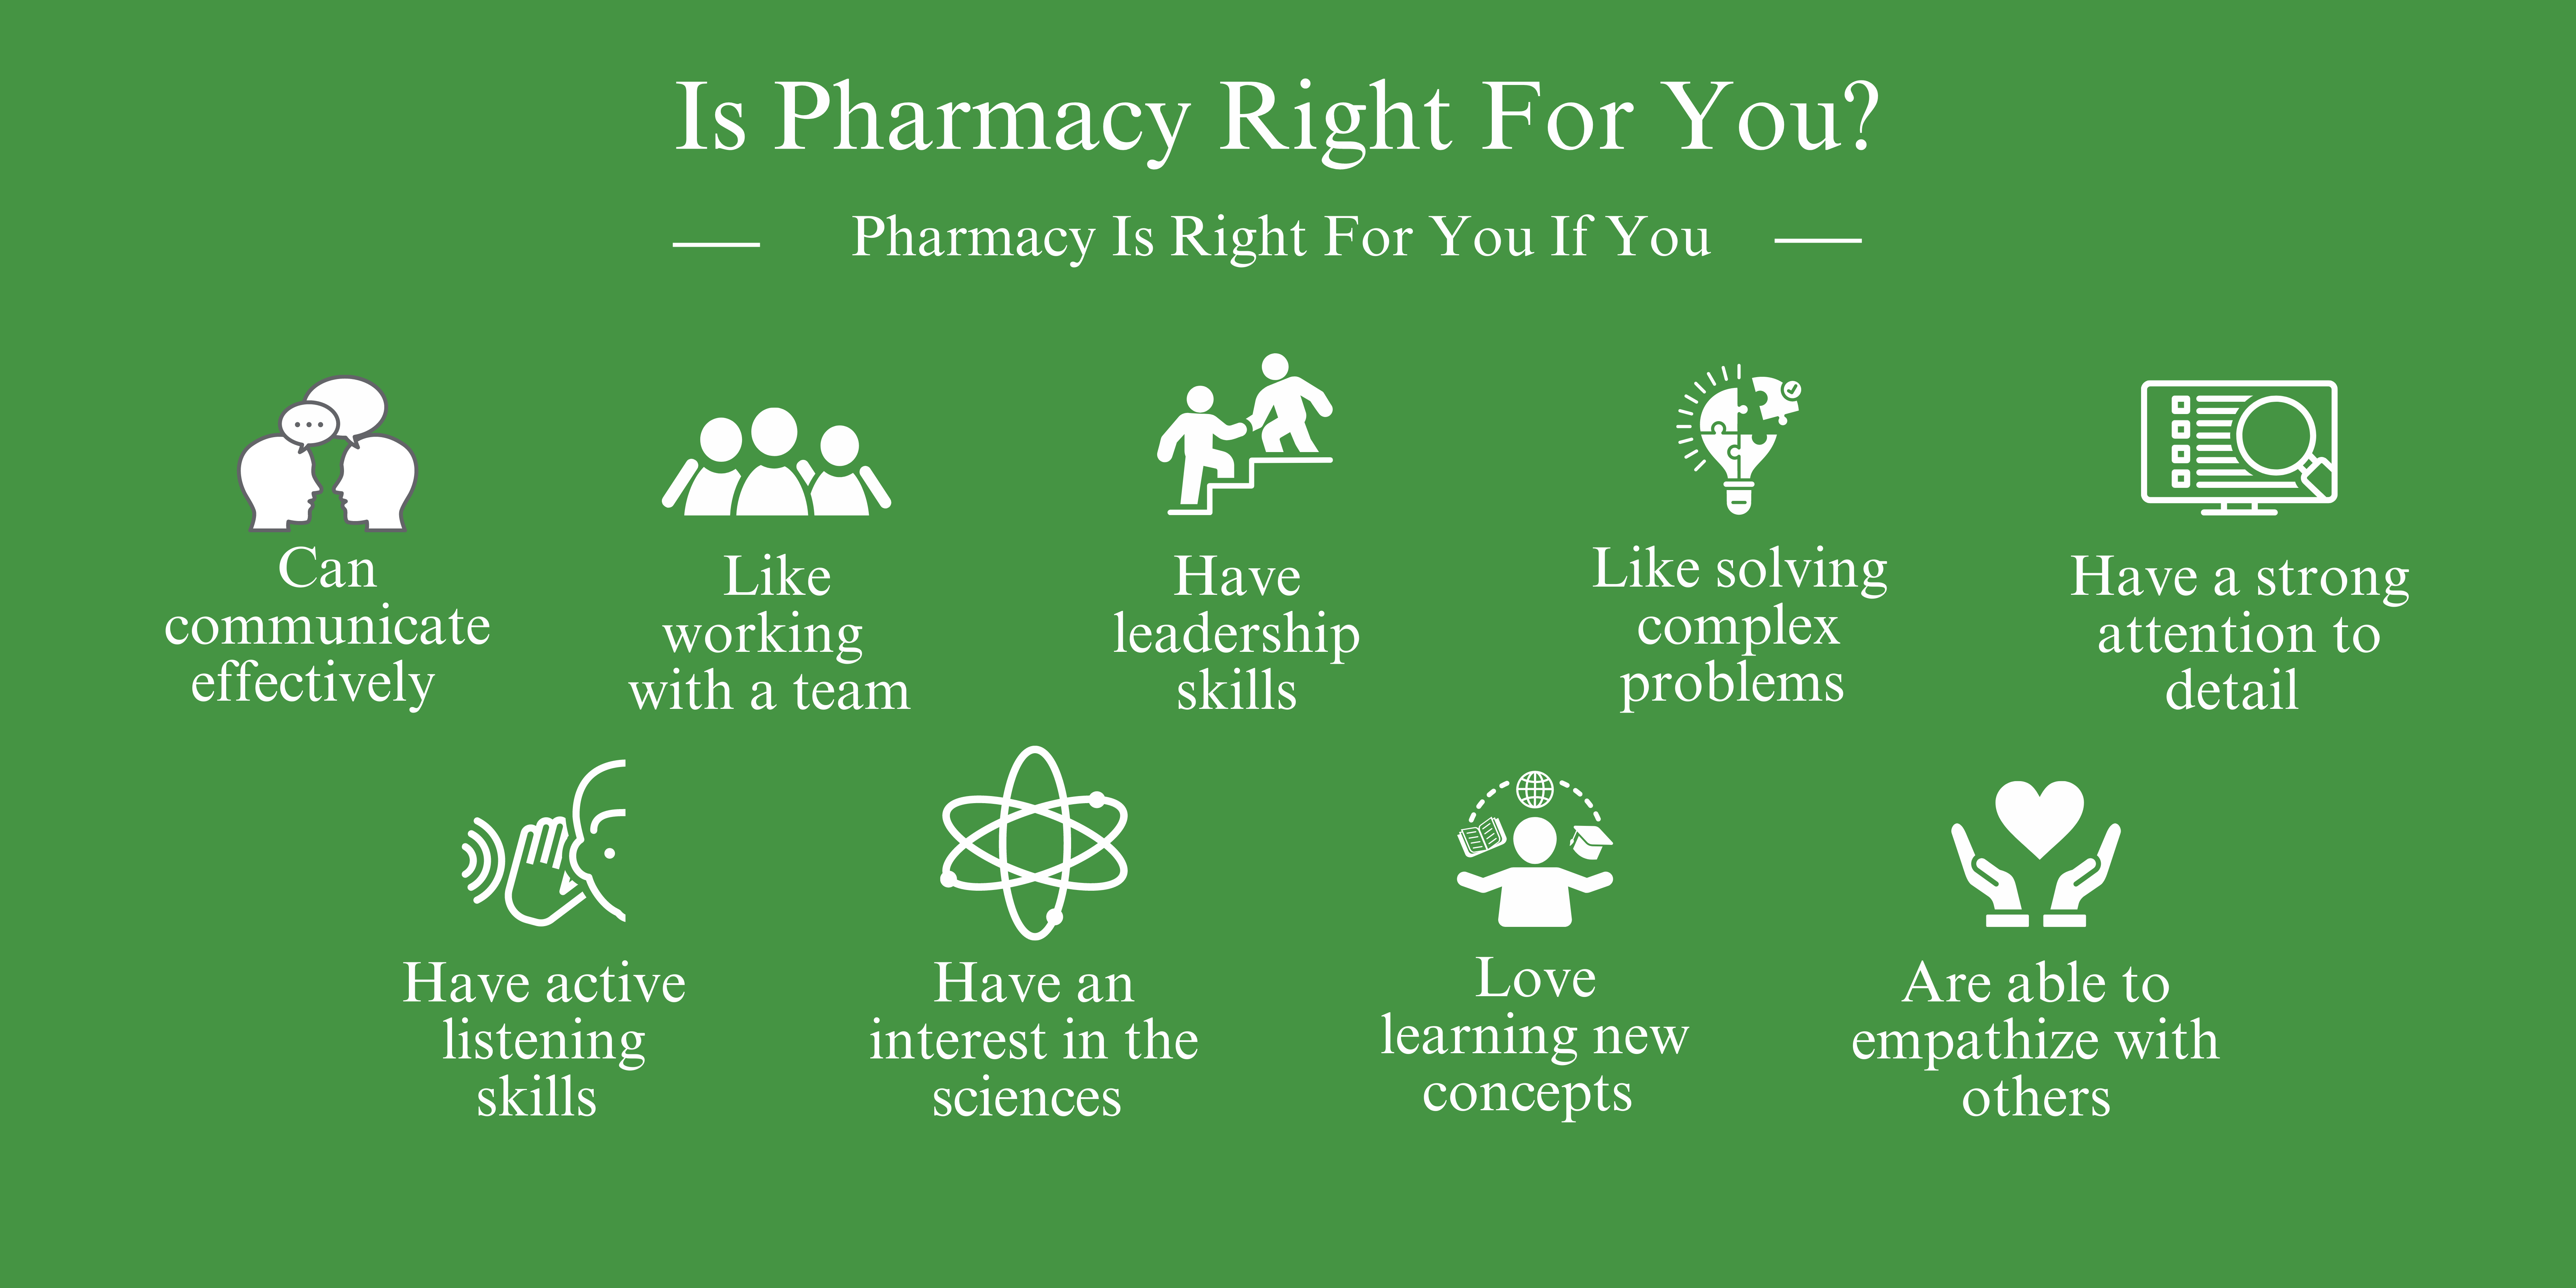 Is Pharmacy Right For You? Pharmacy Is Right For You If You Can communicate effectively, Like working with a team, Have leadership skills, Like solving complex problems, Have a strong attention to detail, Have active listening skills, Have an interest in the sciences, Love learning new concepts, Are able to empathize with others